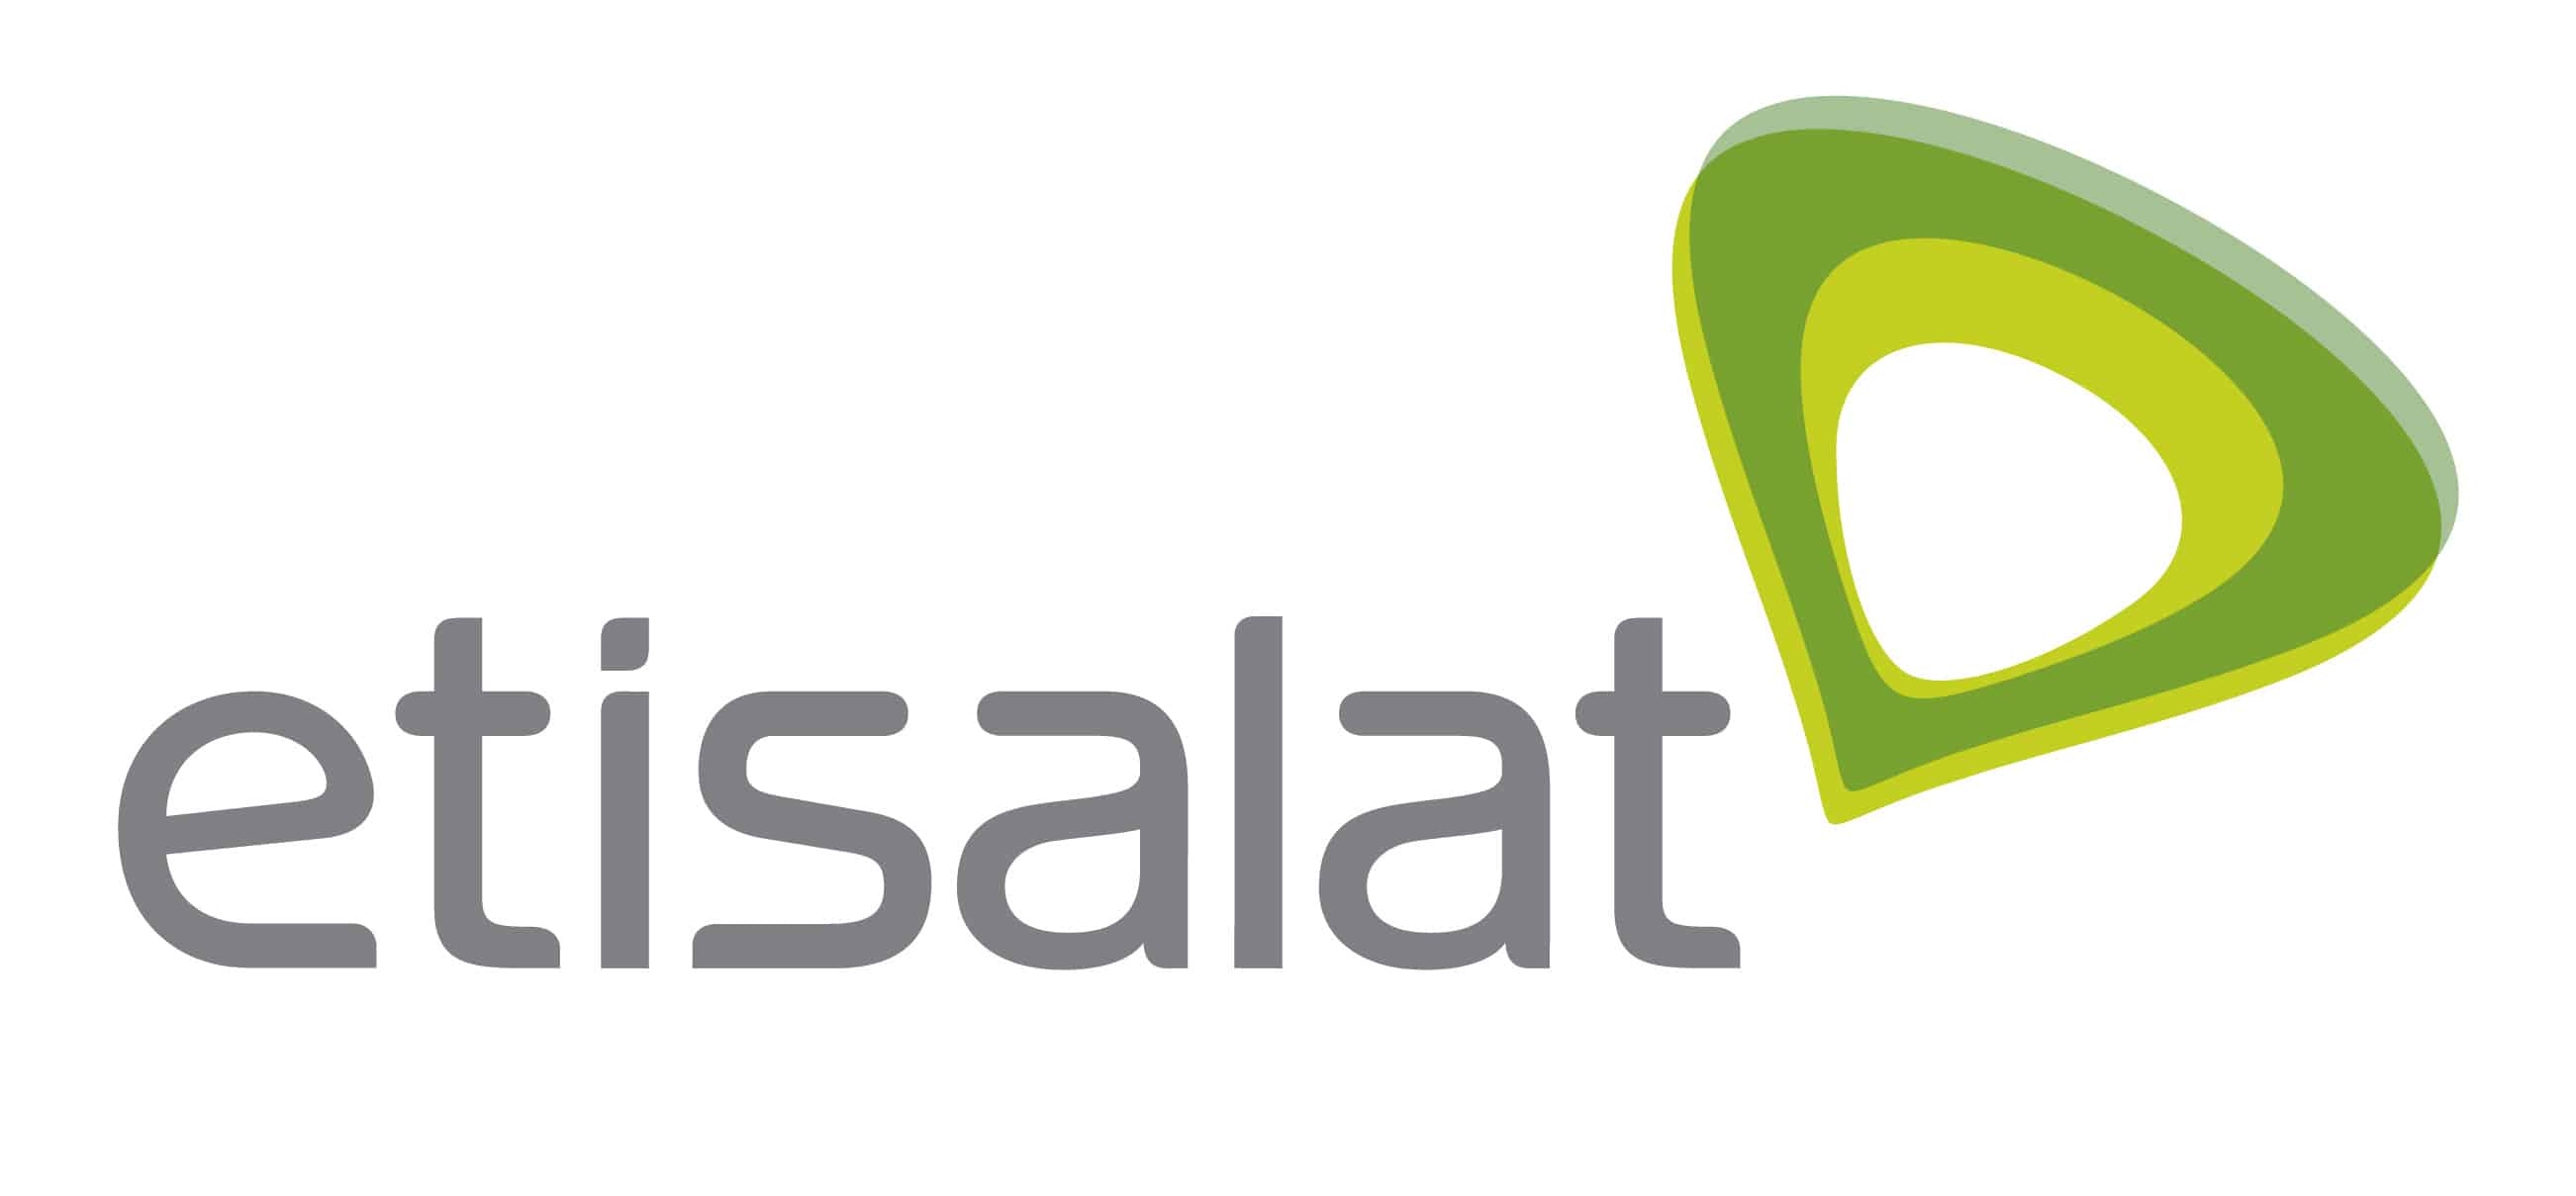 How To Transfer or Share Data on Etisalat Network